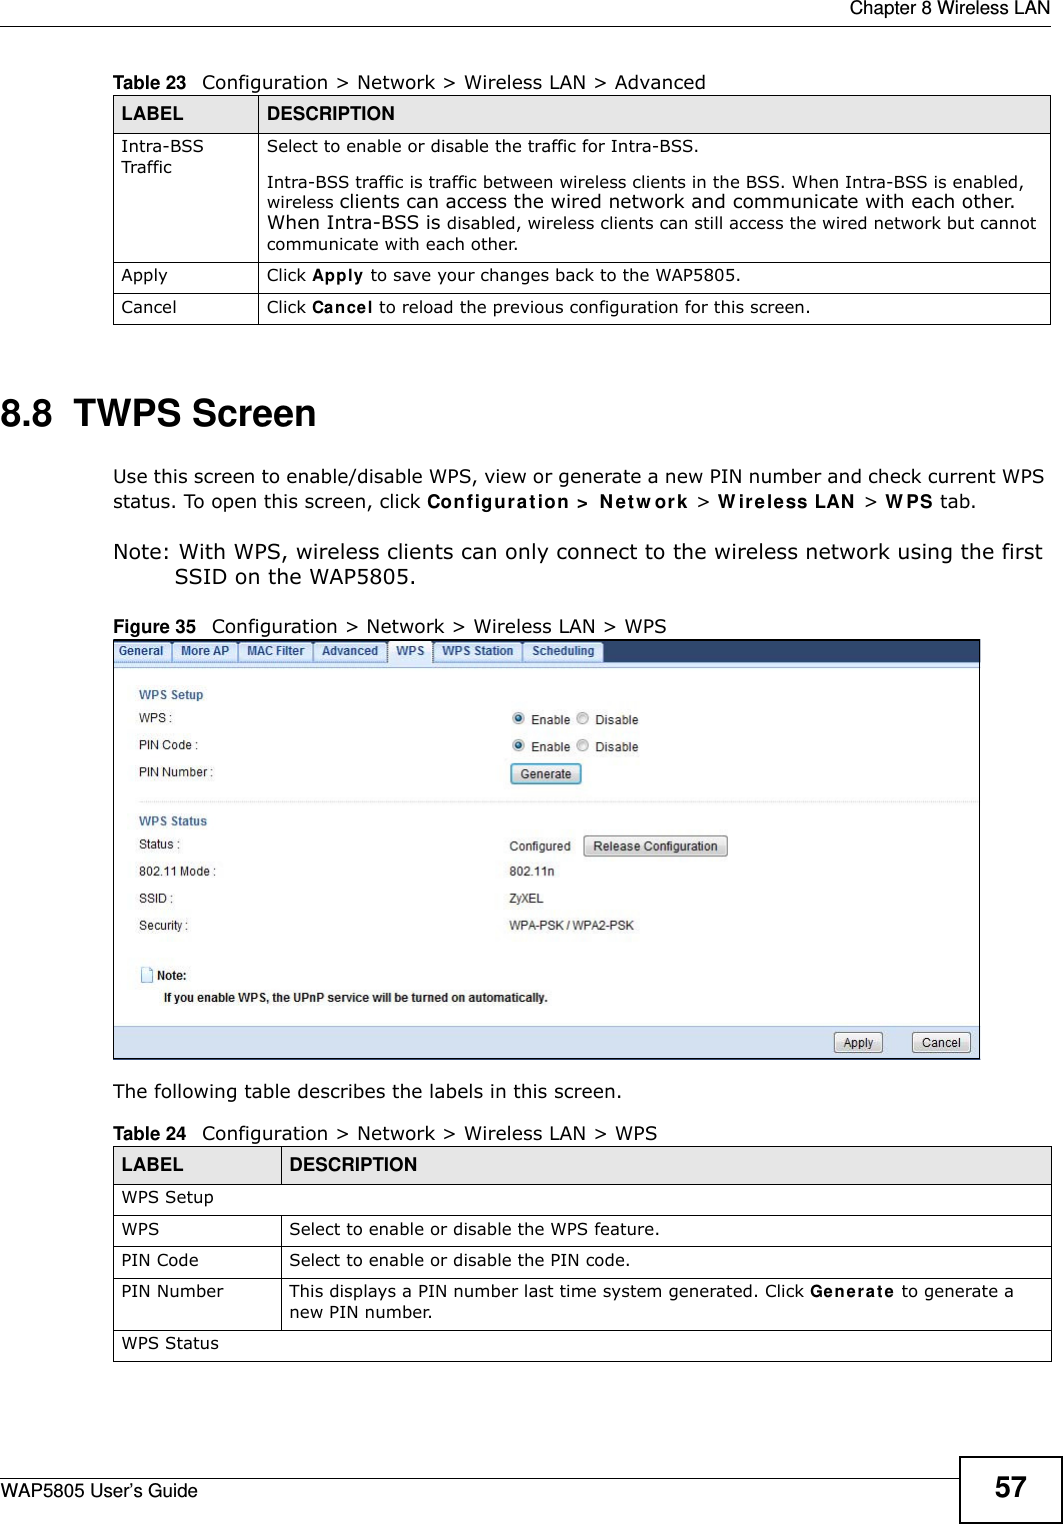  Chapter 8 Wireless LANWAP5805 User’s Guide 578.8  TWPS Screen  Use this screen to enable/disable WPS, view or generate a new PIN number and check current WPS status. To open this screen, click Configuration &gt; Network &gt; Wireless LAN &gt; WPS tab.Note: With WPS, wireless clients can only connect to the wireless network using the first SSID on the WAP5805.Figure 35   Configuration &gt; Network &gt; Wireless LAN &gt; WPSThe following table describes the labels in this screen.Intra-BSS TrafficSelect to enable or disable the traffic for Intra-BSS.Intra-BSS traffic is traffic between wireless clients in the BSS. When Intra-BSS is enabled, wireless clients can access the wired network and communicate with each other. When Intra-BSS is disabled, wireless clients can still access the wired network but cannot communicate with each other.Apply Click Apply to save your changes back to the WAP5805.Cancel Click Cancel to reload the previous configuration for this screen.Table 23   Configuration &gt; Network &gt; Wireless LAN &gt; AdvancedLABEL DESCRIPTIONTable 24   Configuration &gt; Network &gt; Wireless LAN &gt; WPSLABEL DESCRIPTIONWPS SetupWPS Select to enable or disable the WPS feature.PIN Code Select to enable or disable the PIN code.PIN Number This displays a PIN number last time system generated. Click Generate to generate a new PIN number.WPS Status